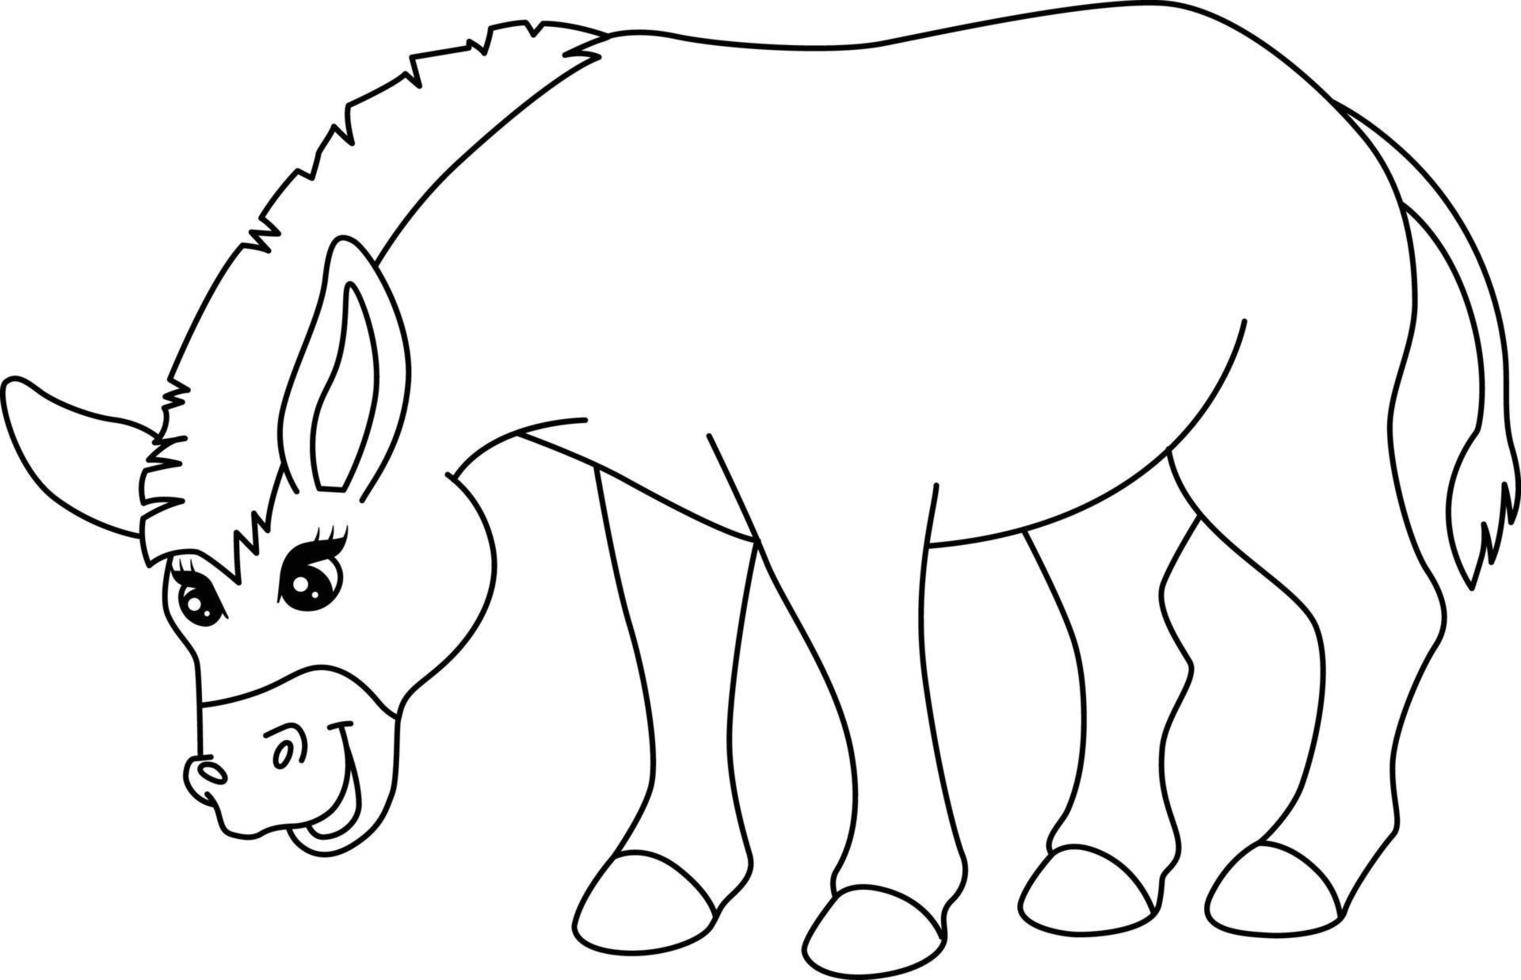 Donkey Coloring Page Isolated for Kids 20 Vector Art at Vecteezy